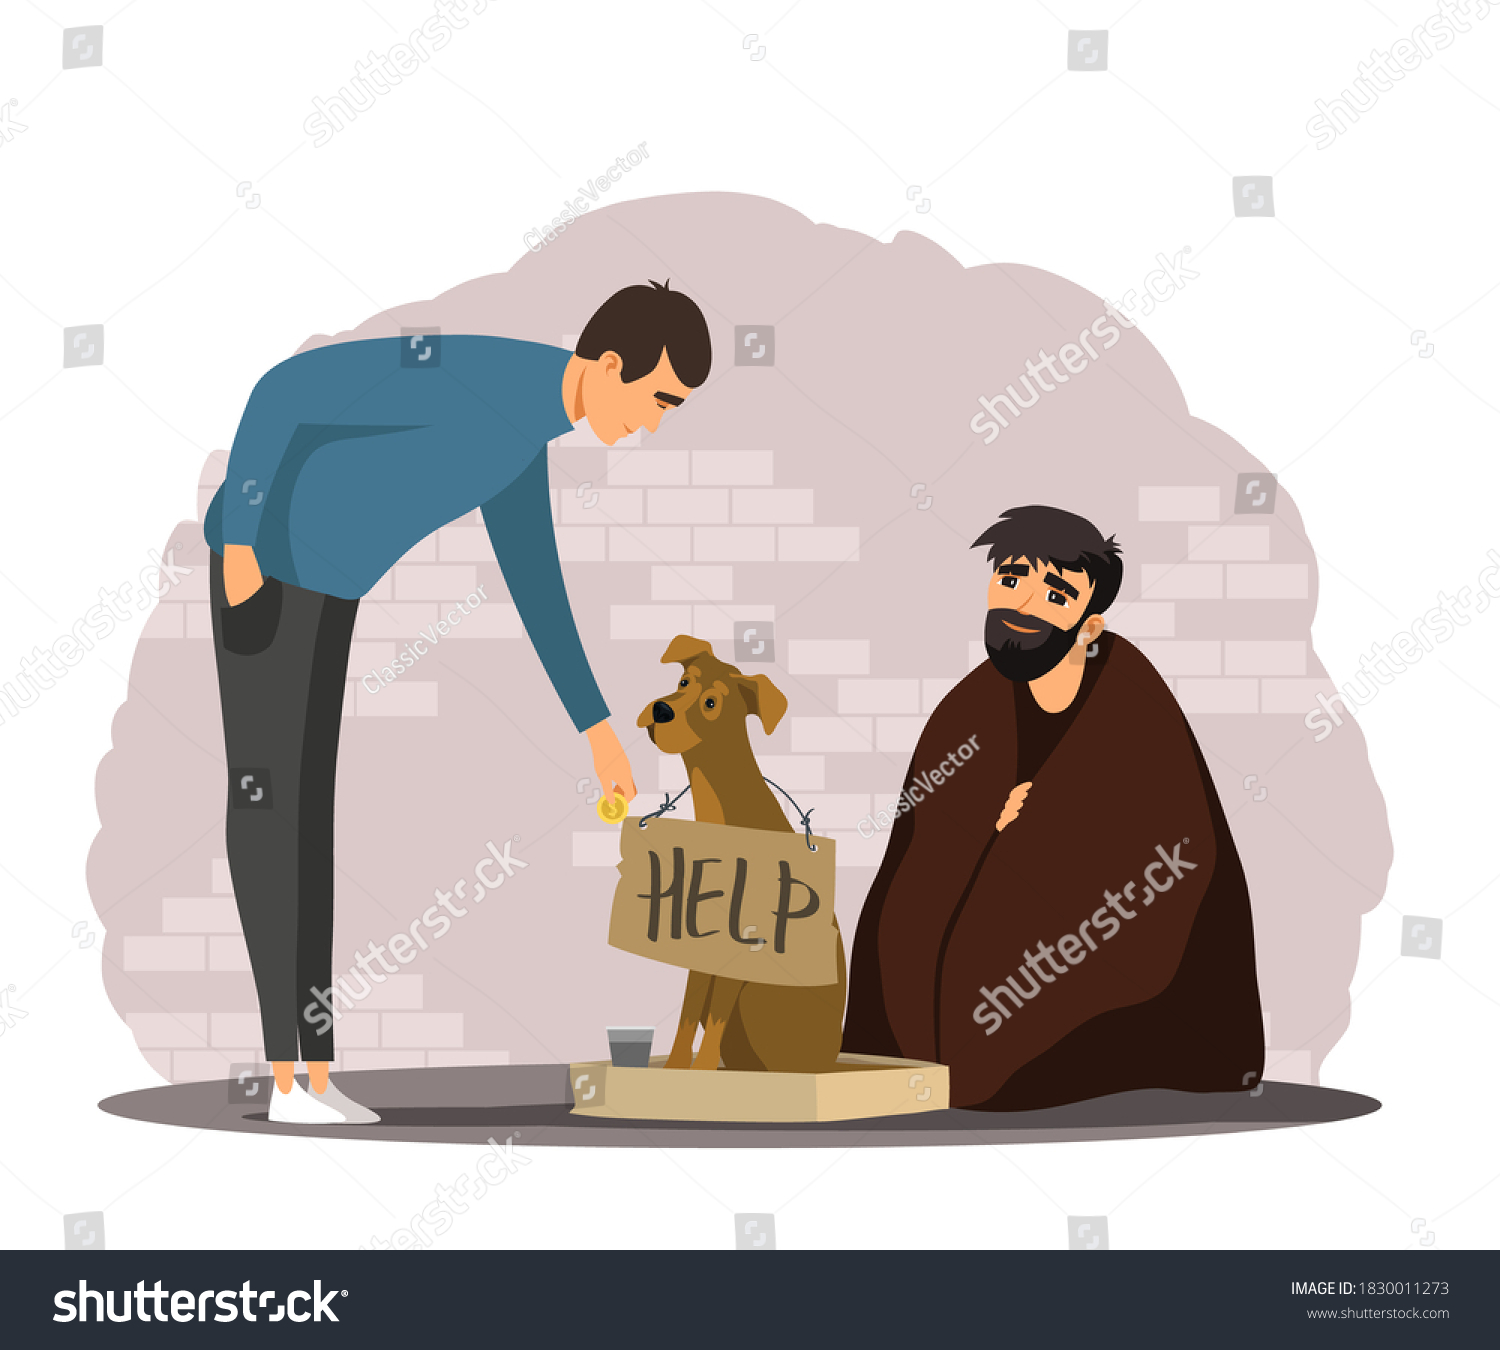 SVG of Man helping poor homeless person with dog. Poverty and charity vector illustration. Guy giving money to beggar in poverty. Social inequality in society. Person donating to jobless man in need. svg